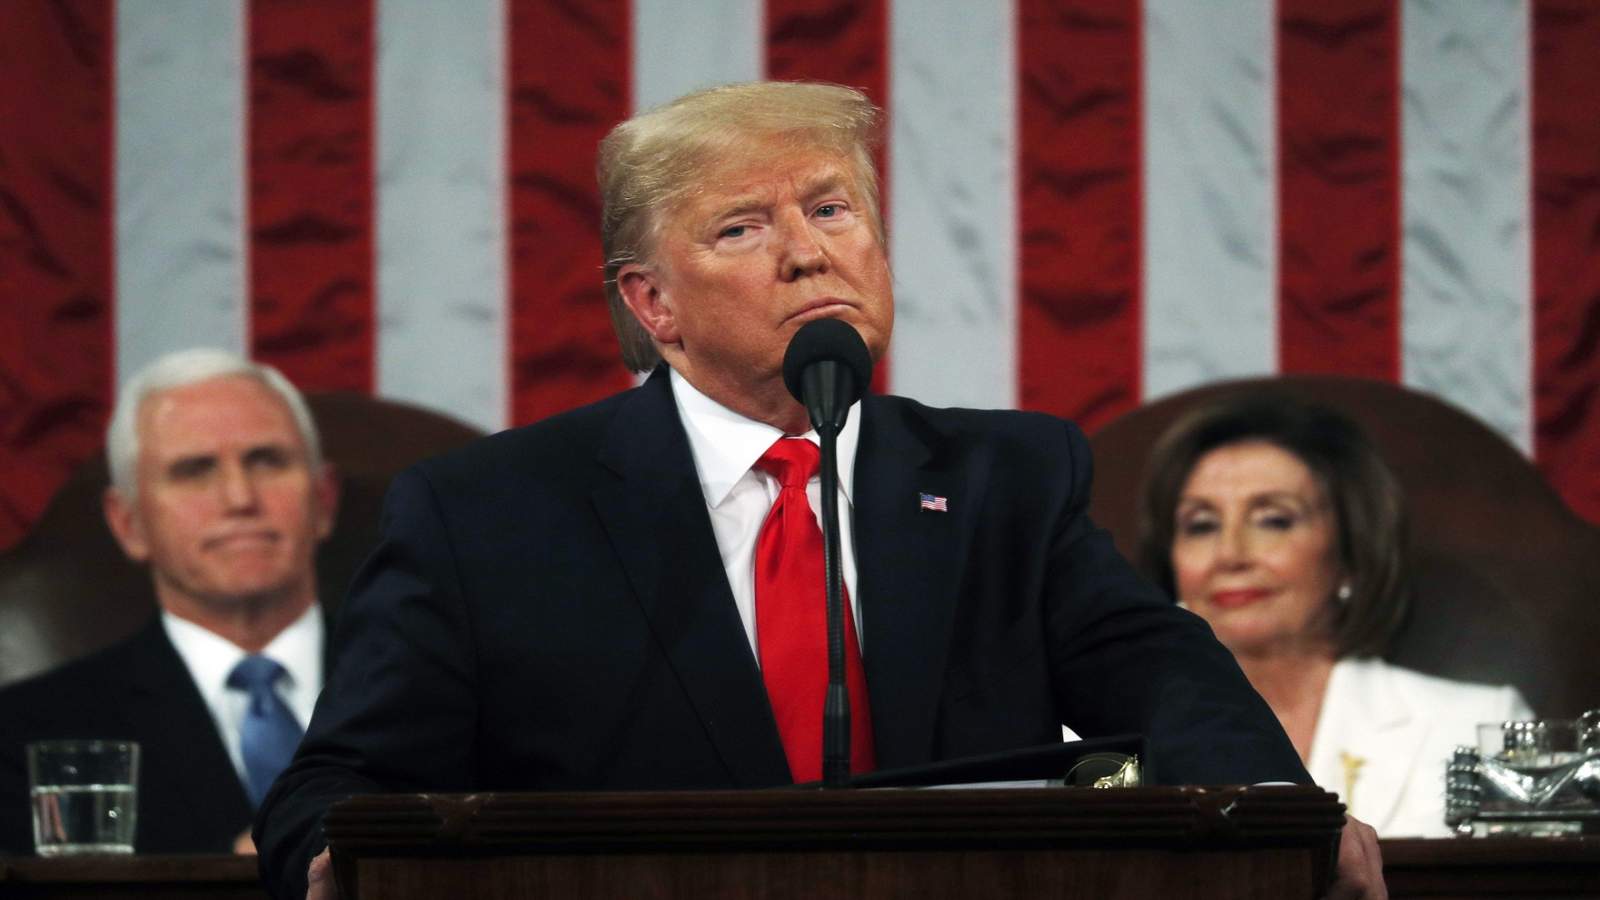 WATCH: President Trump gives State of the Union address